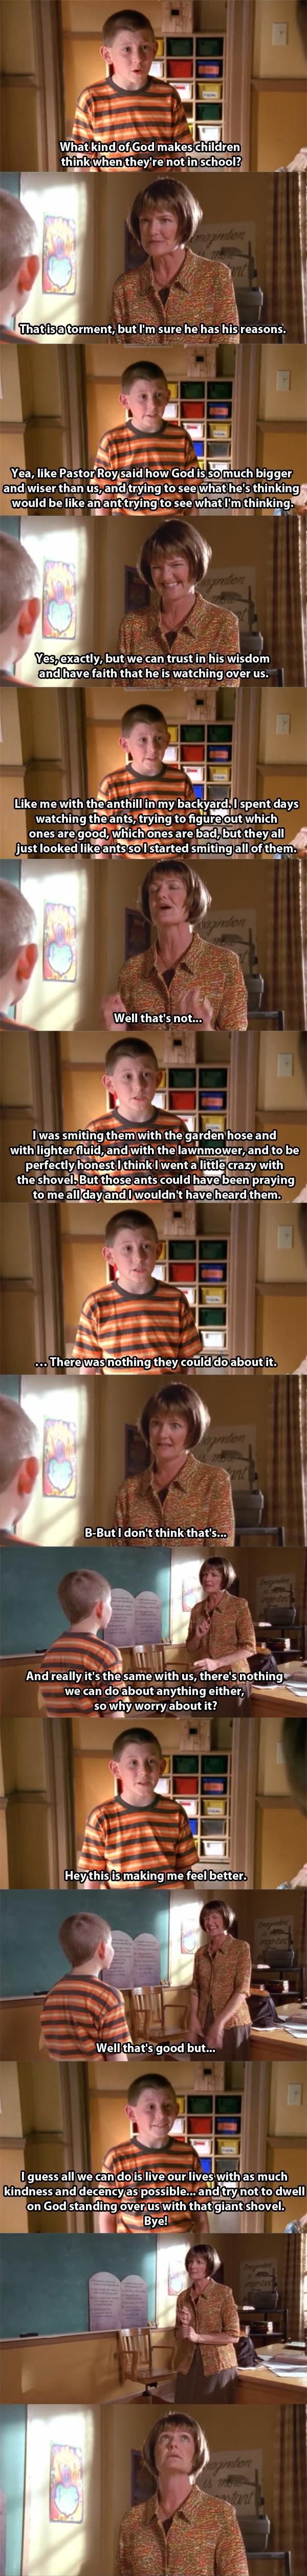 Perspective, brought to you by Malcolm on the Middle.